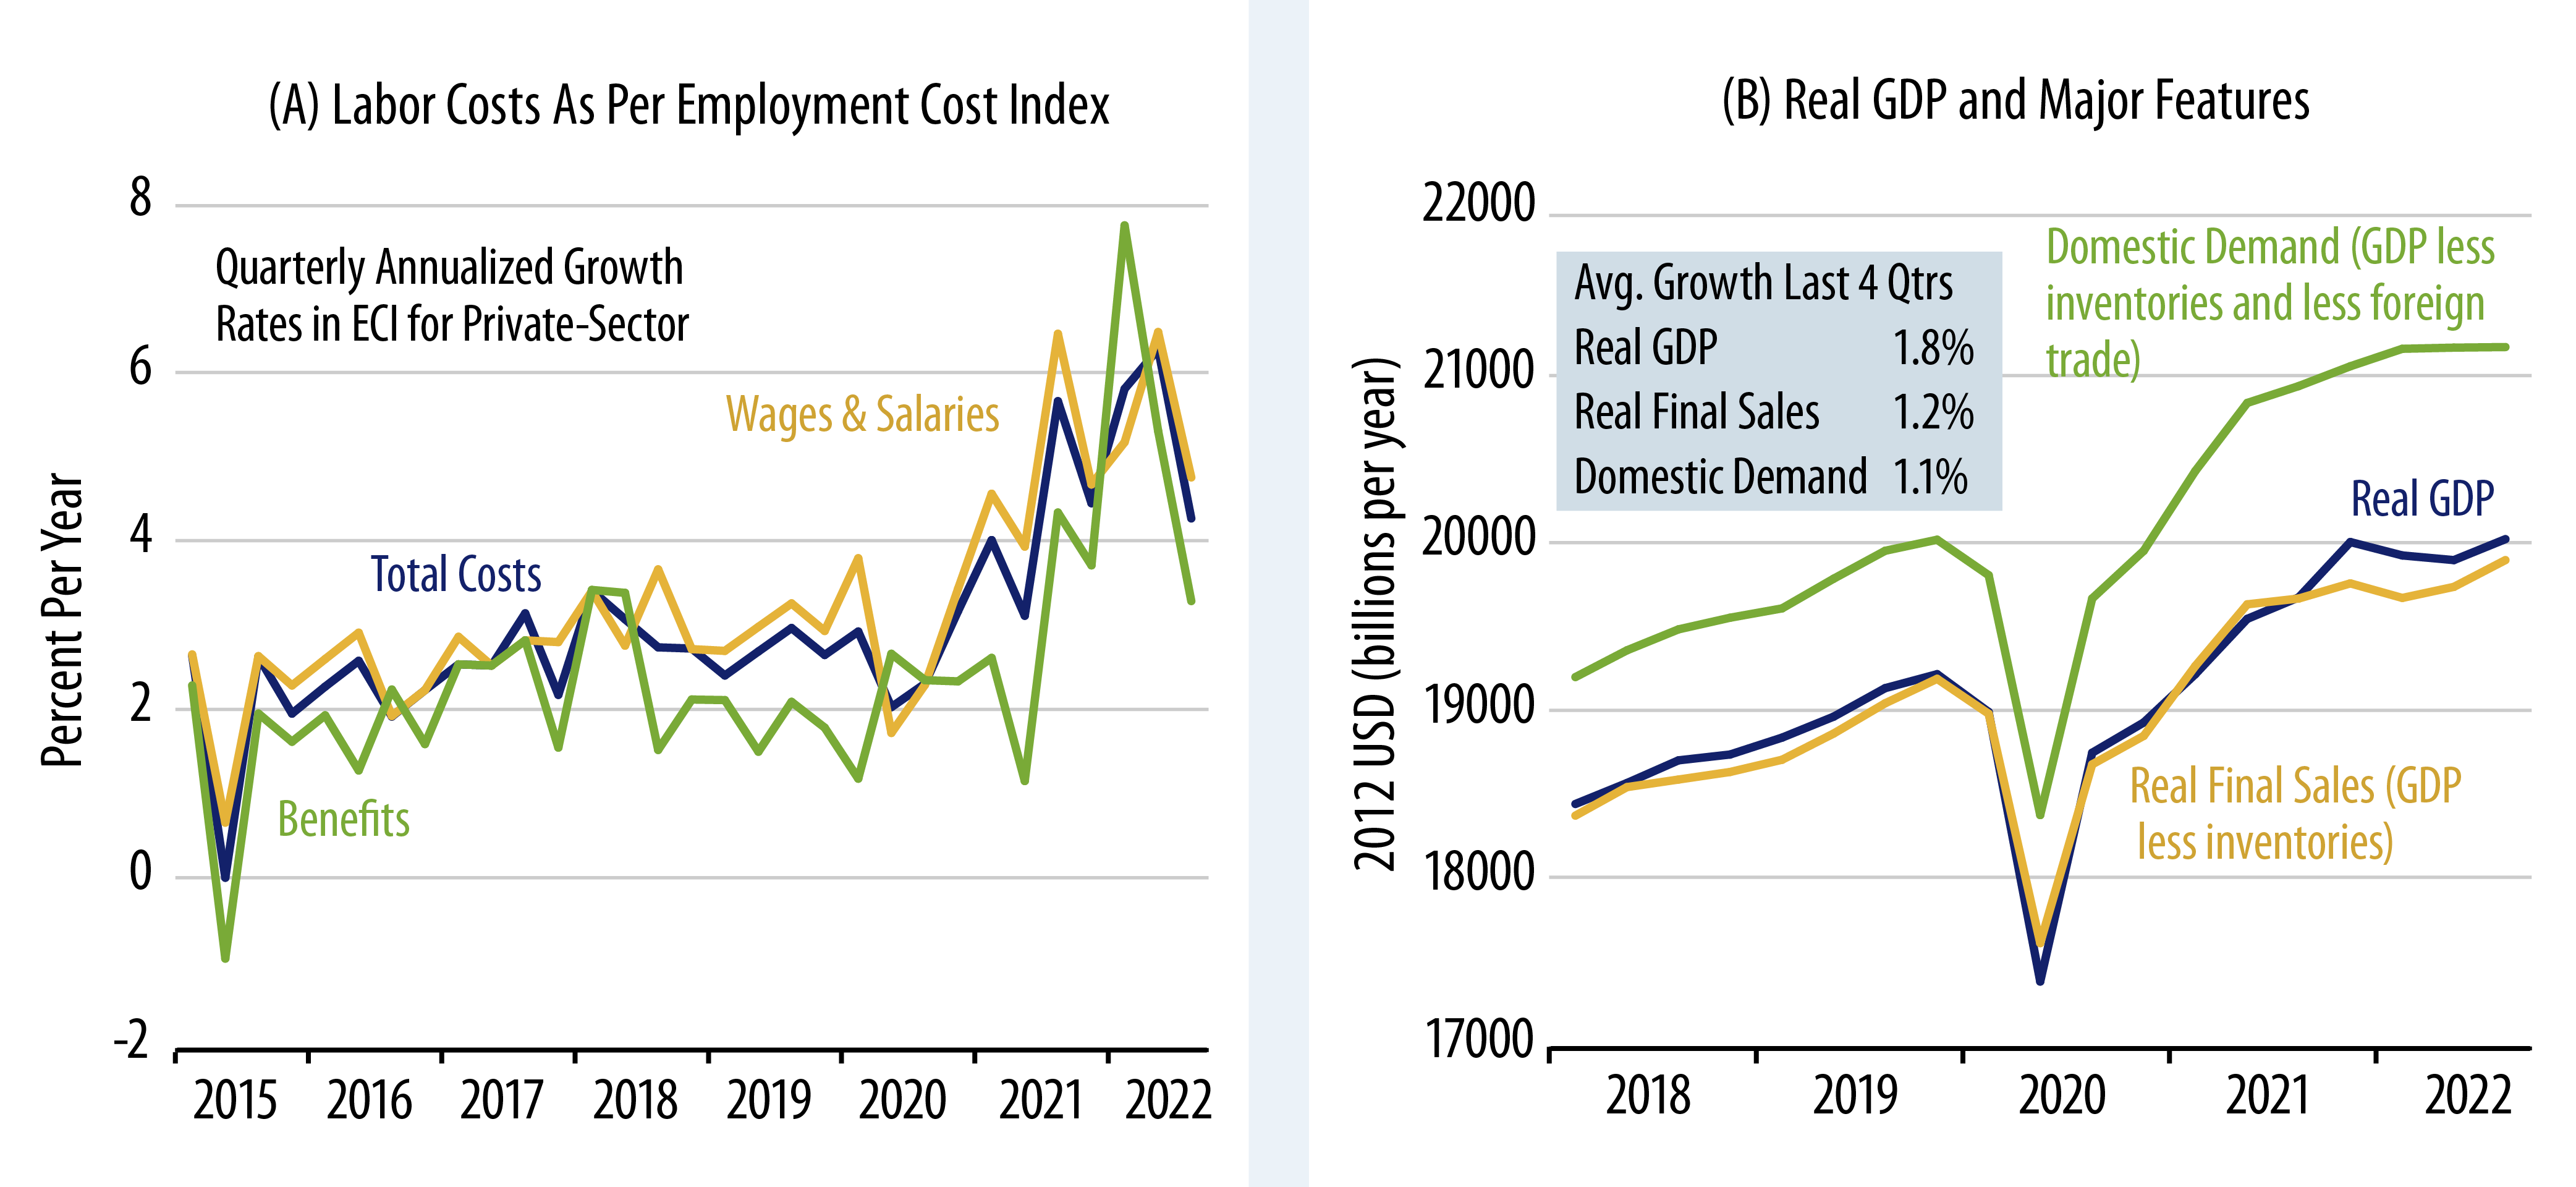 Labor Costs and Real GDP